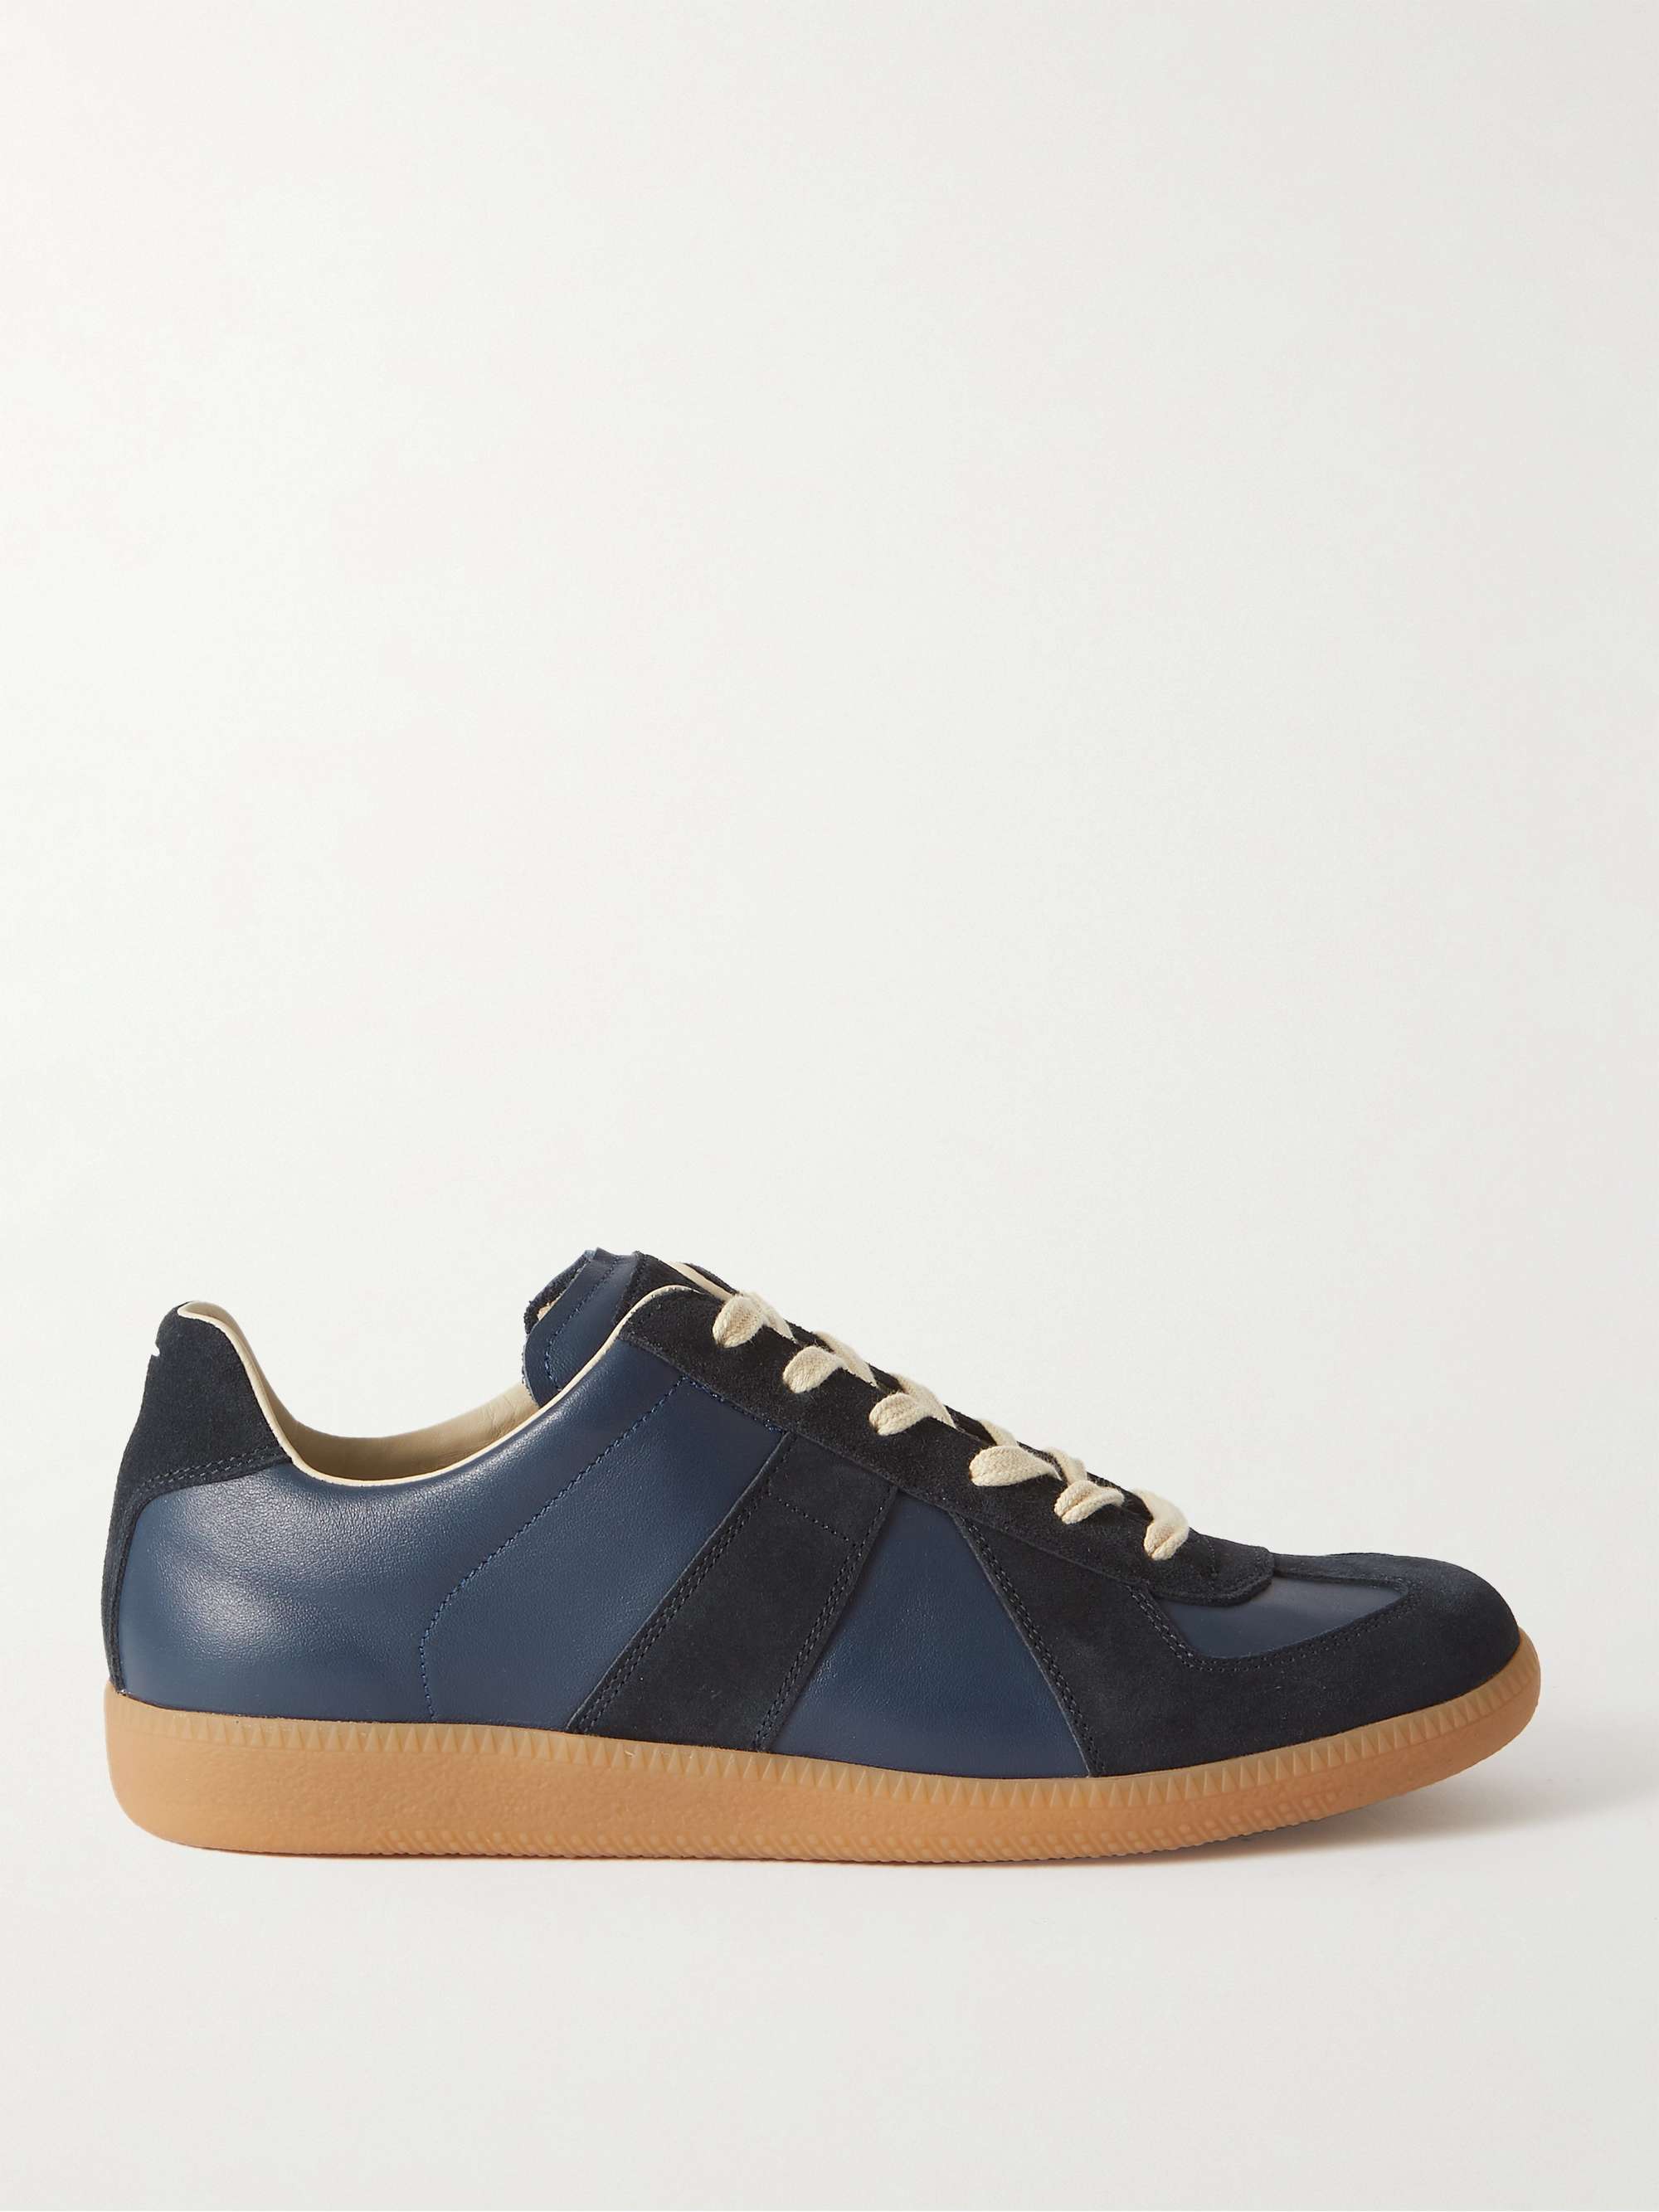 MAISON MARGIELA Replica Leather and Sneakers for Men | MR PORTER